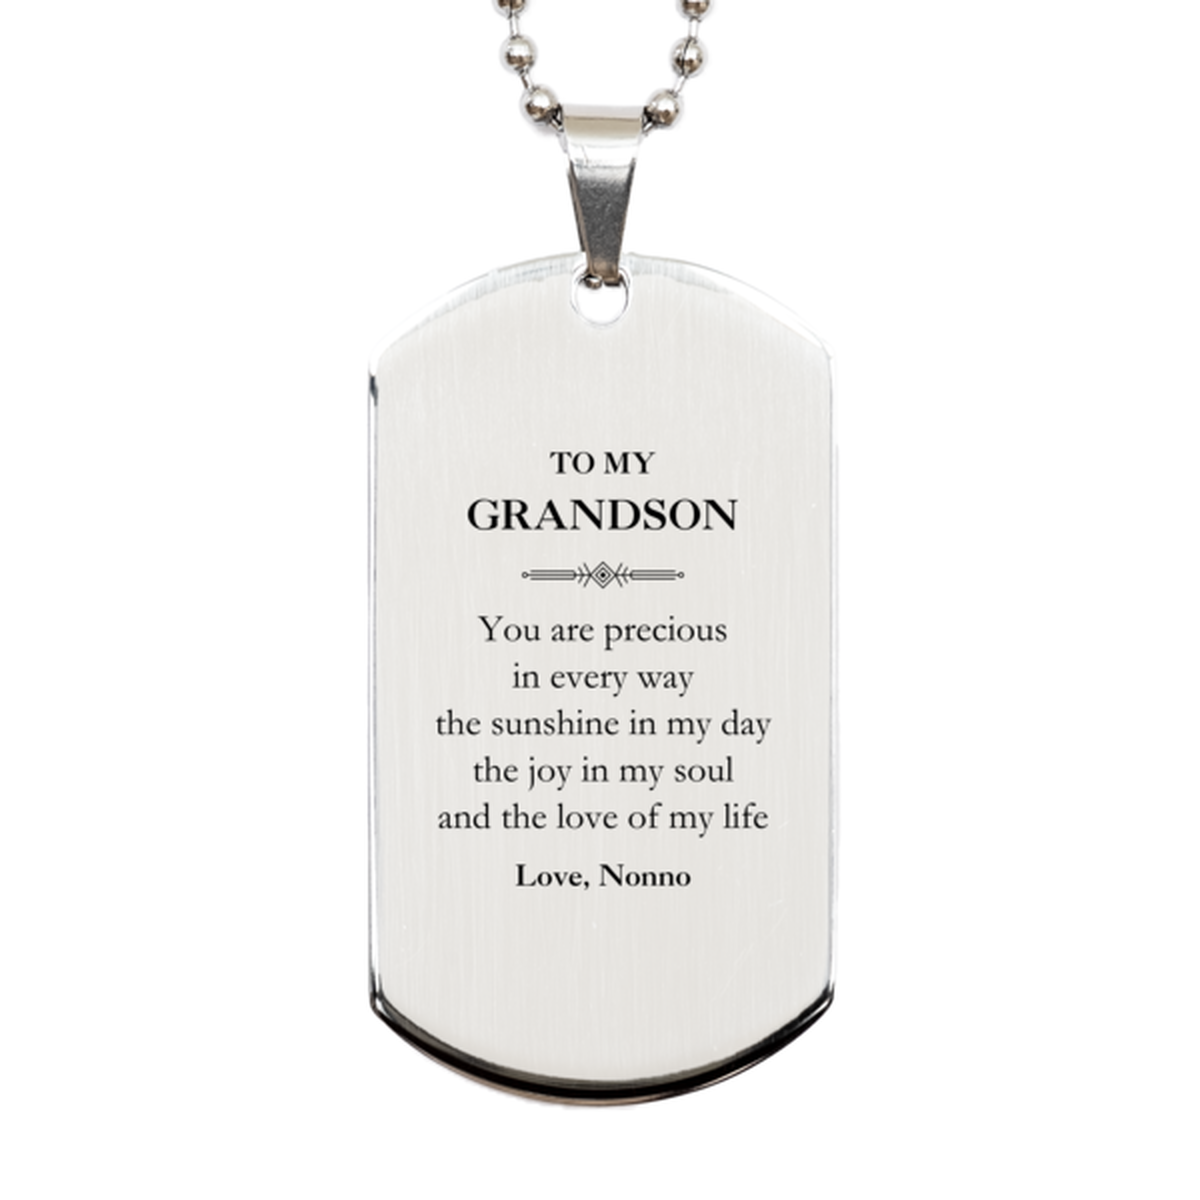 Graduation Gifts for Grandson Silver Dog Tag Present from Nonno, Christmas Grandson Birthday Gifts Grandson You are precious in every way the sunshine in my day. Love, Nonno